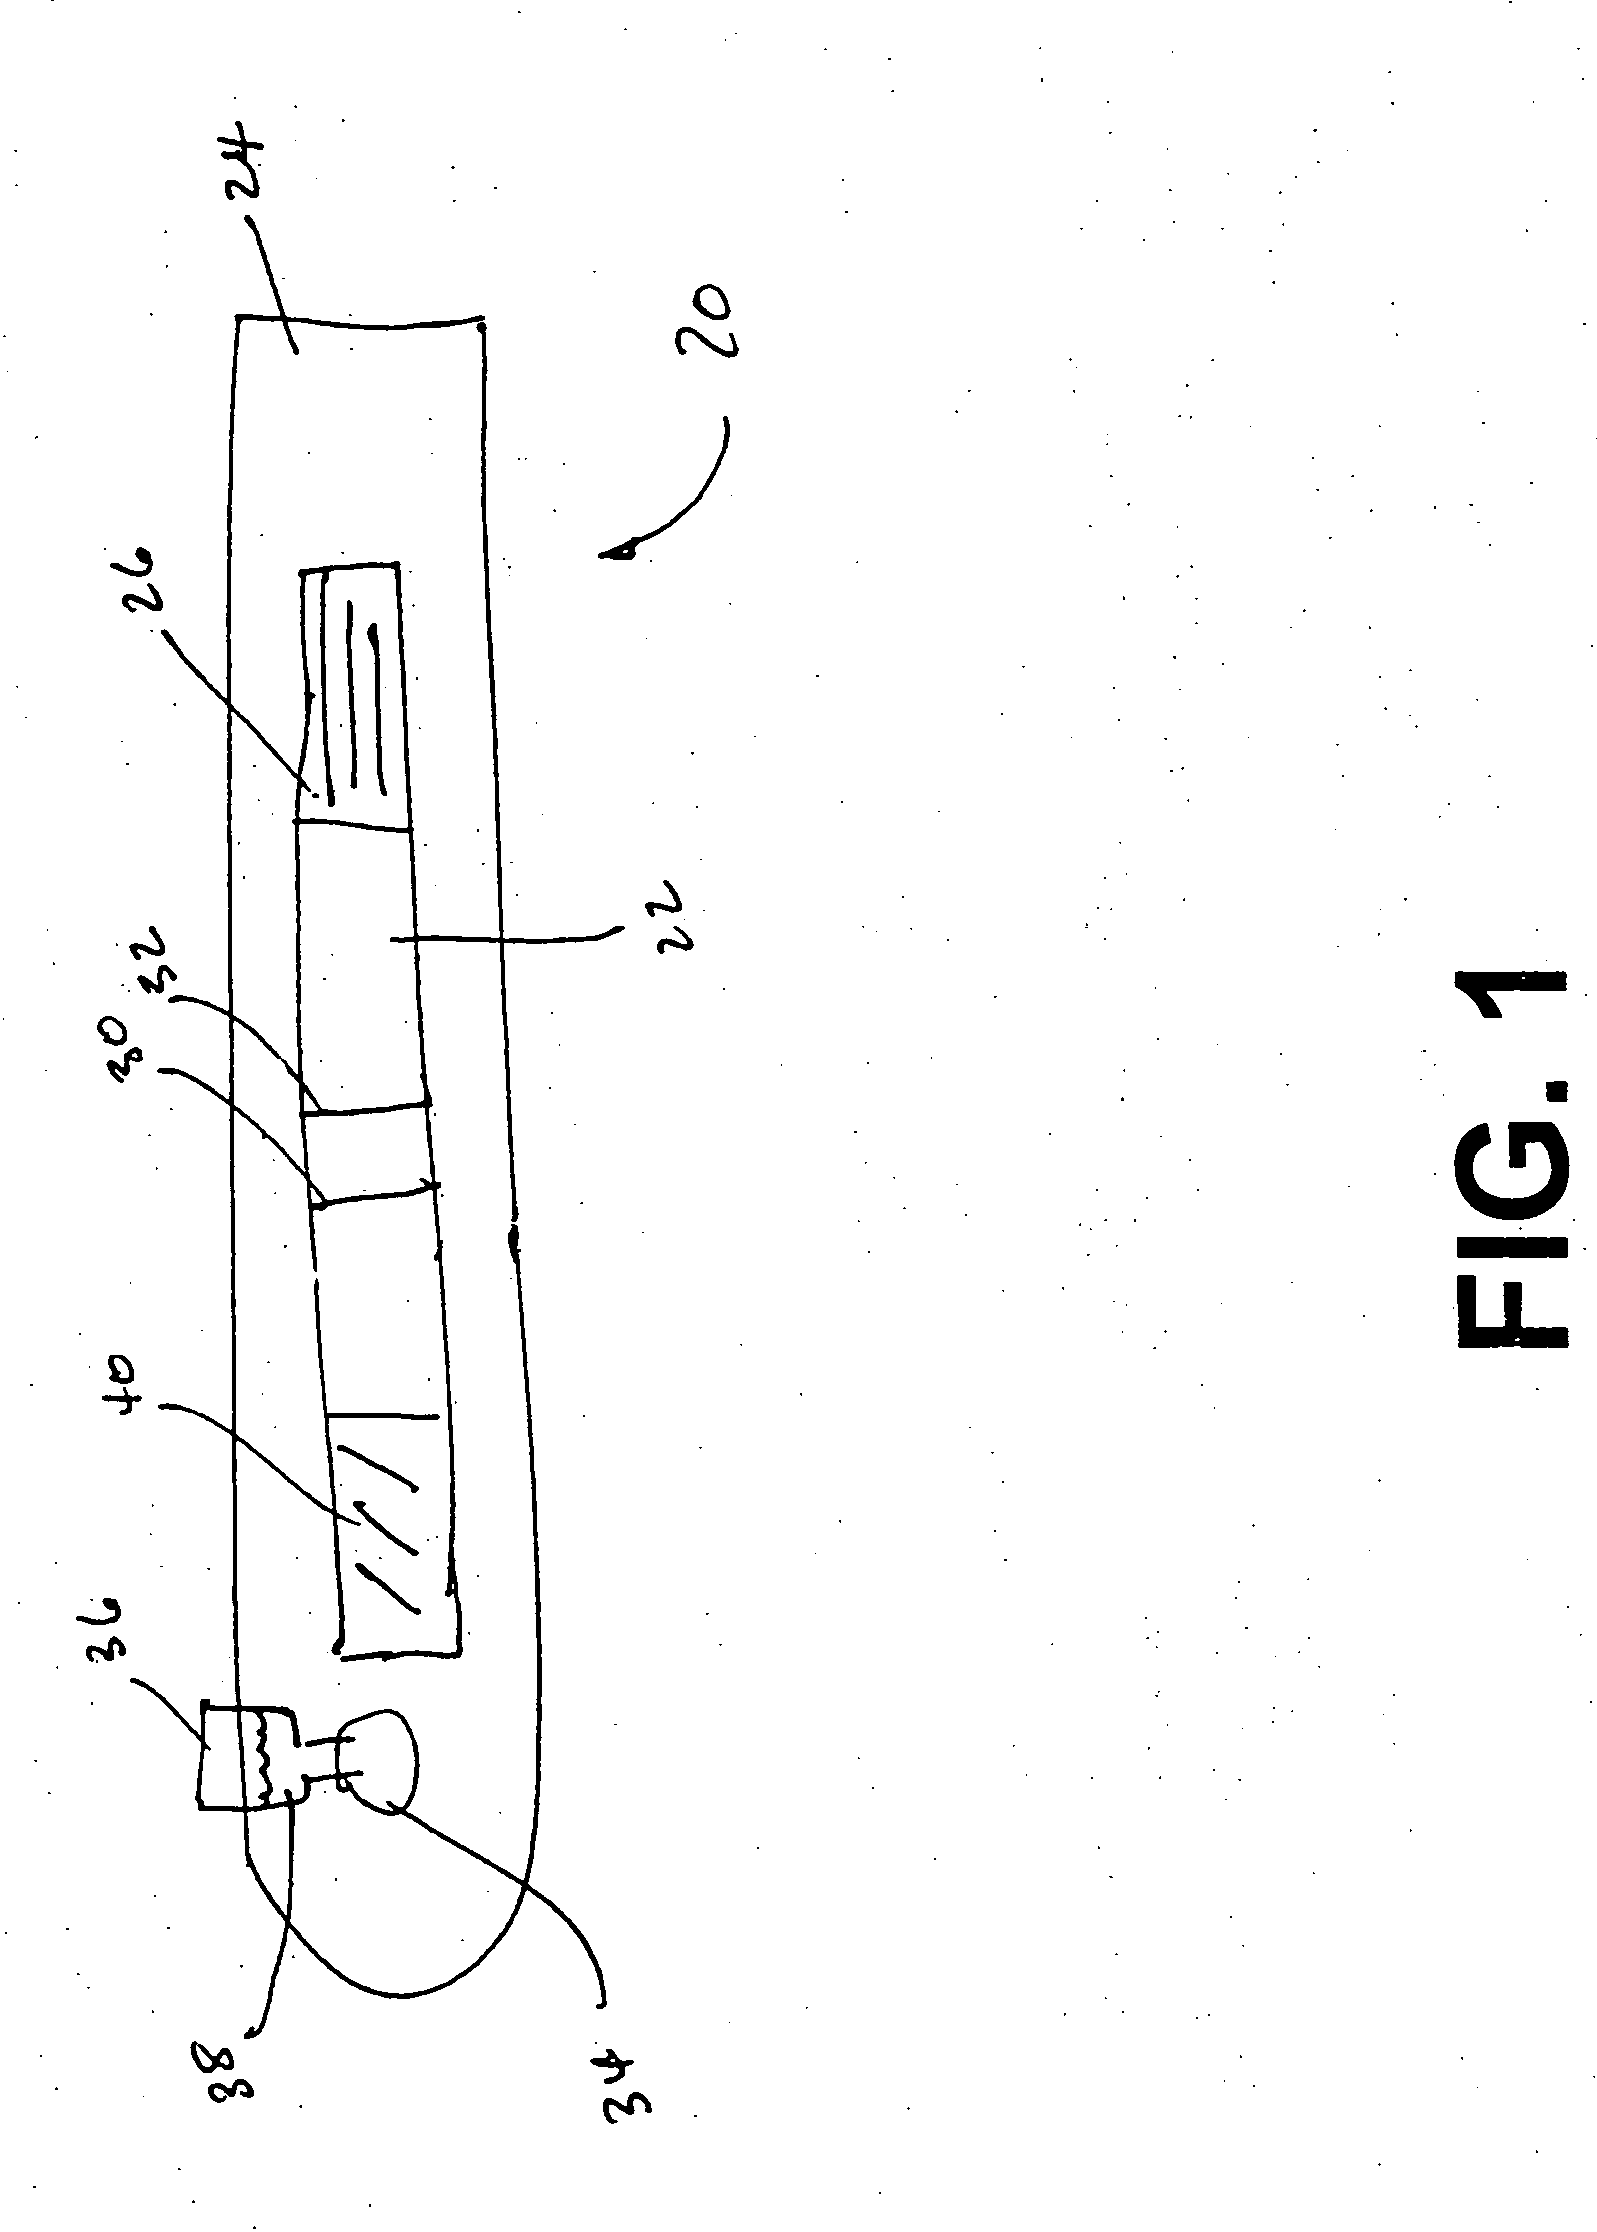 Lateral flow device for the detection of large pathogens